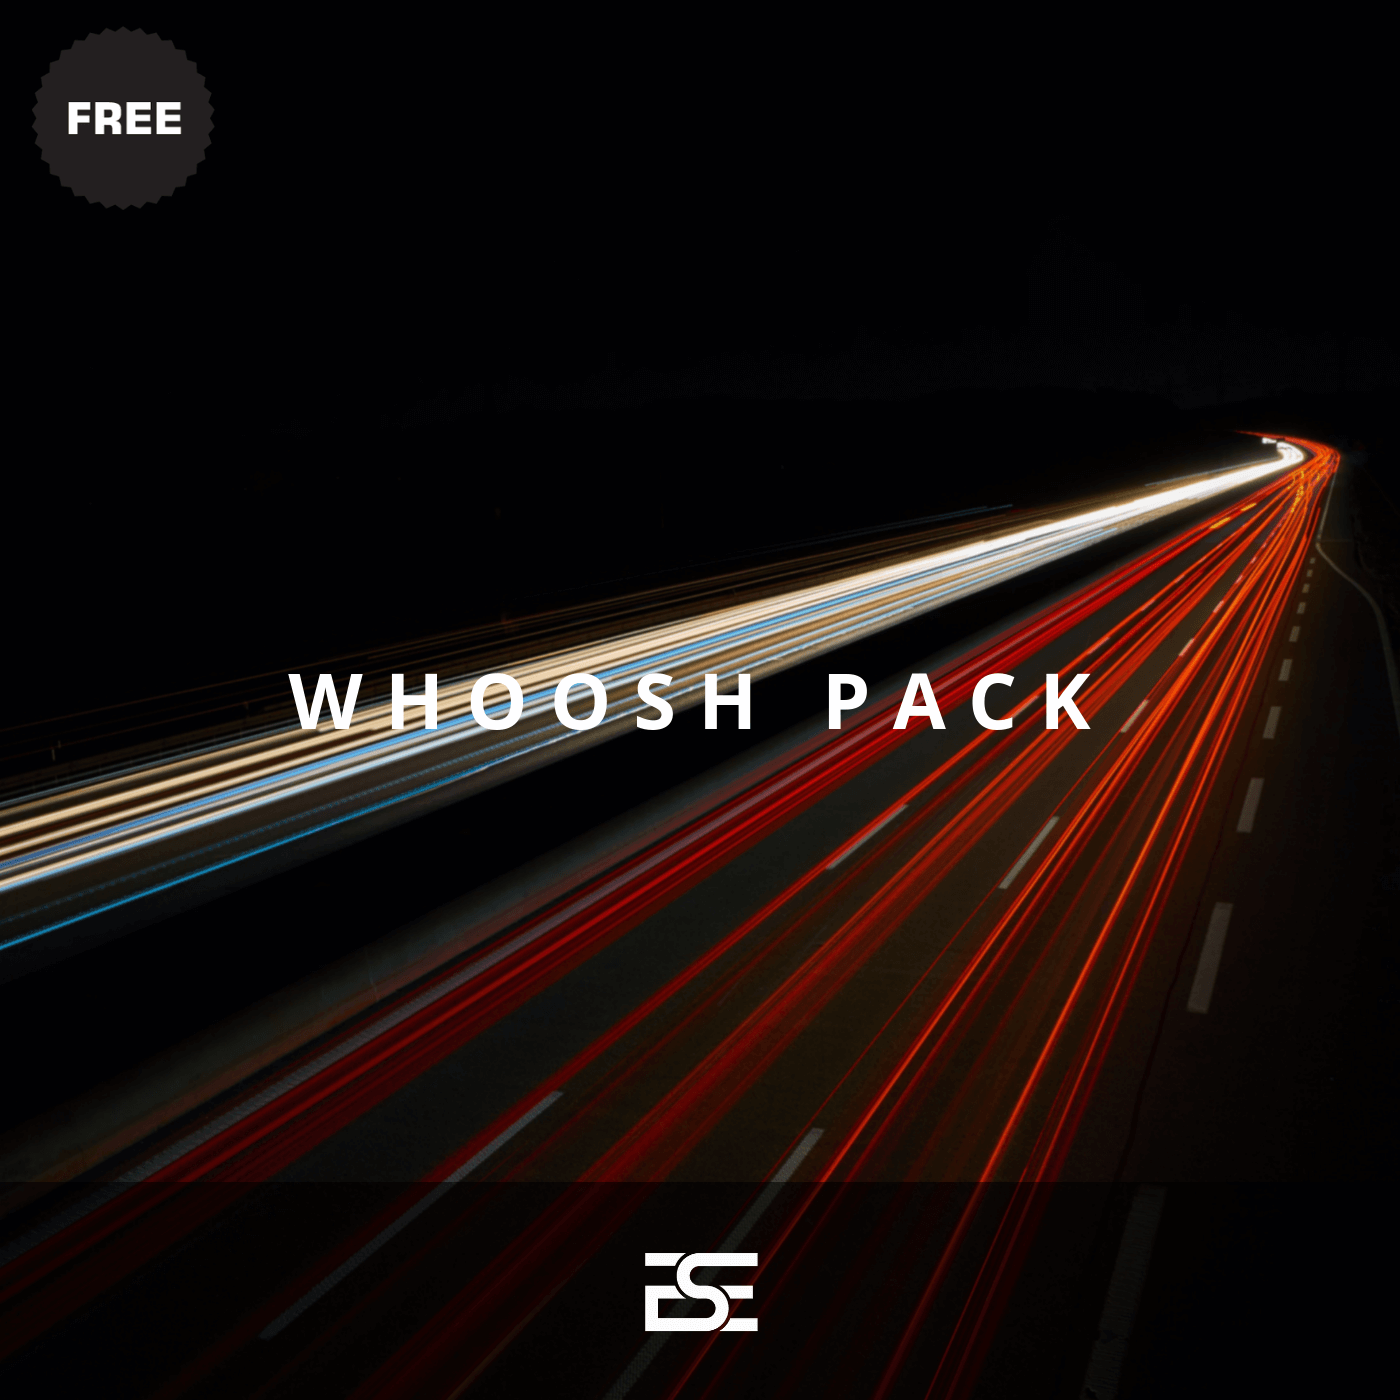 free sound effects pack